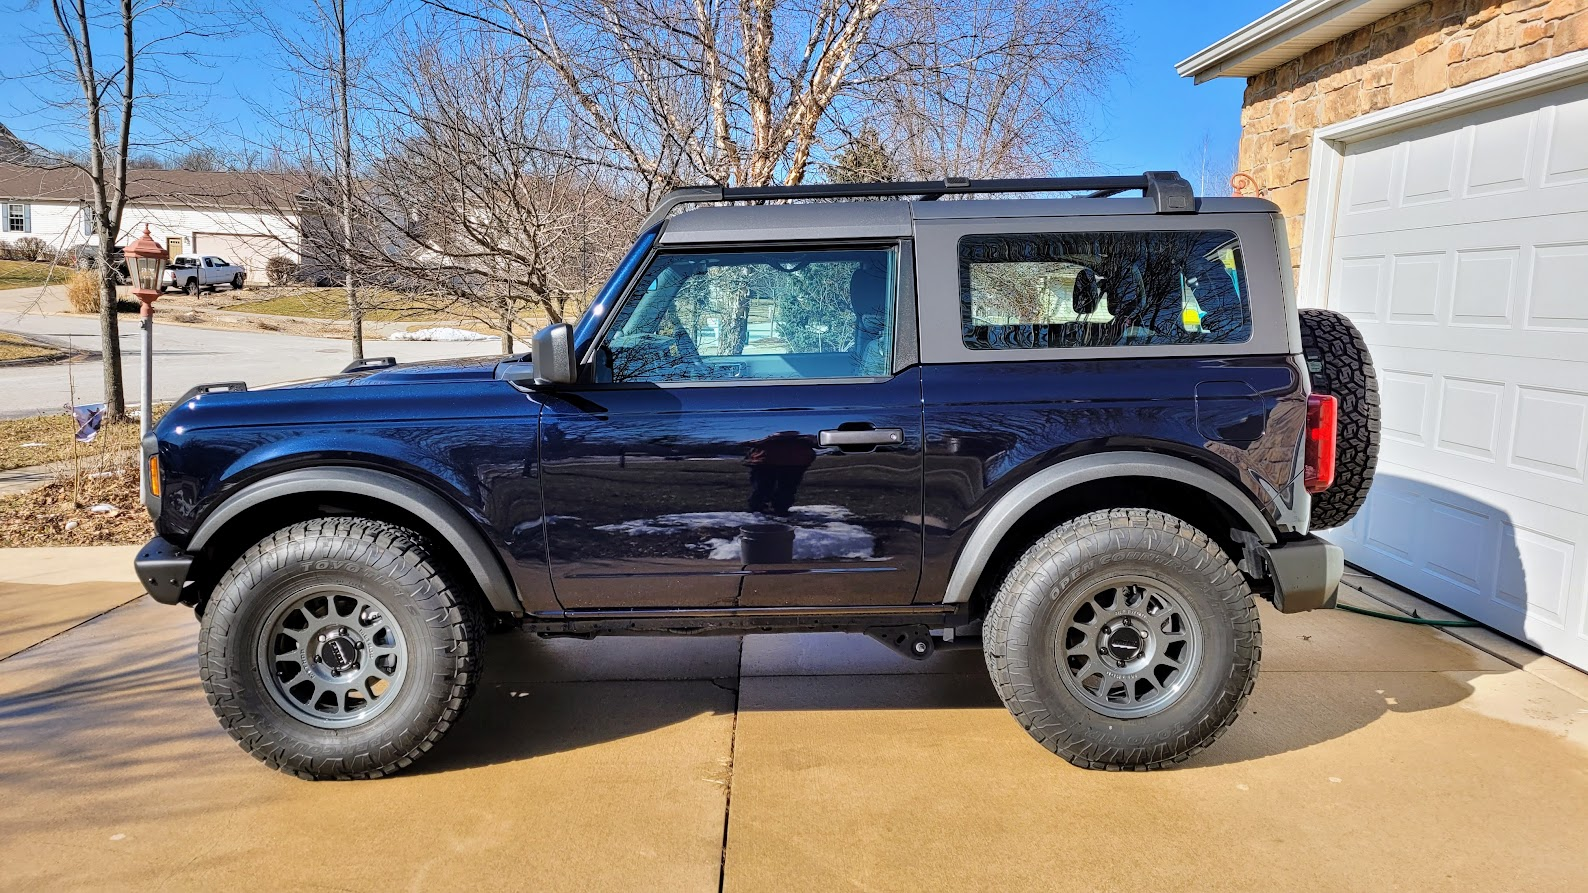 Installed 33 inch tires on stock Base rims - no mods required  Bronco6G -  2021+ Ford Bronco & Bronco Raptor Forum, News, Blog & Owners Community